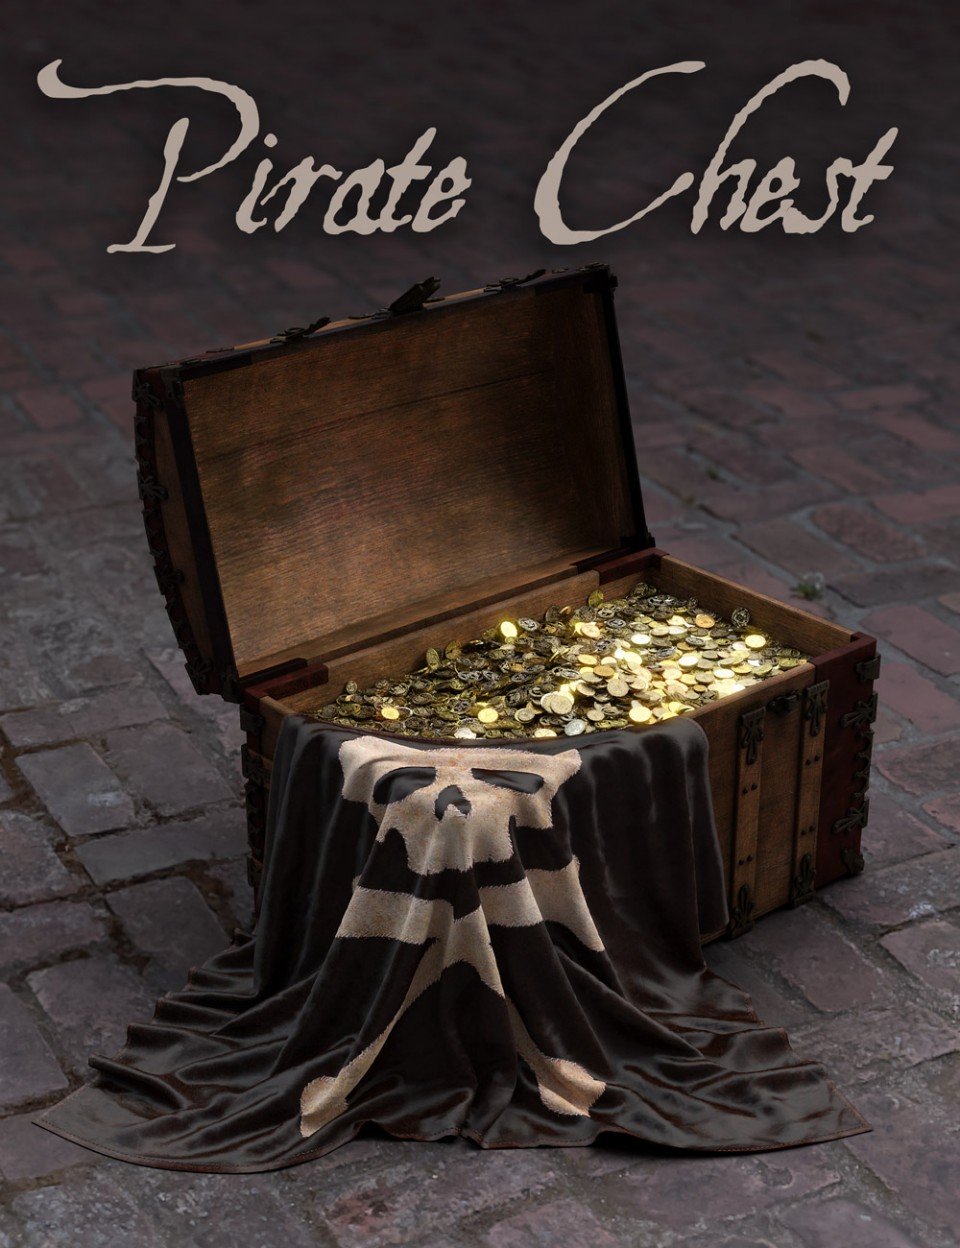 Pirate Treasure Chest, Coins and Flag_DAZ3D下载站